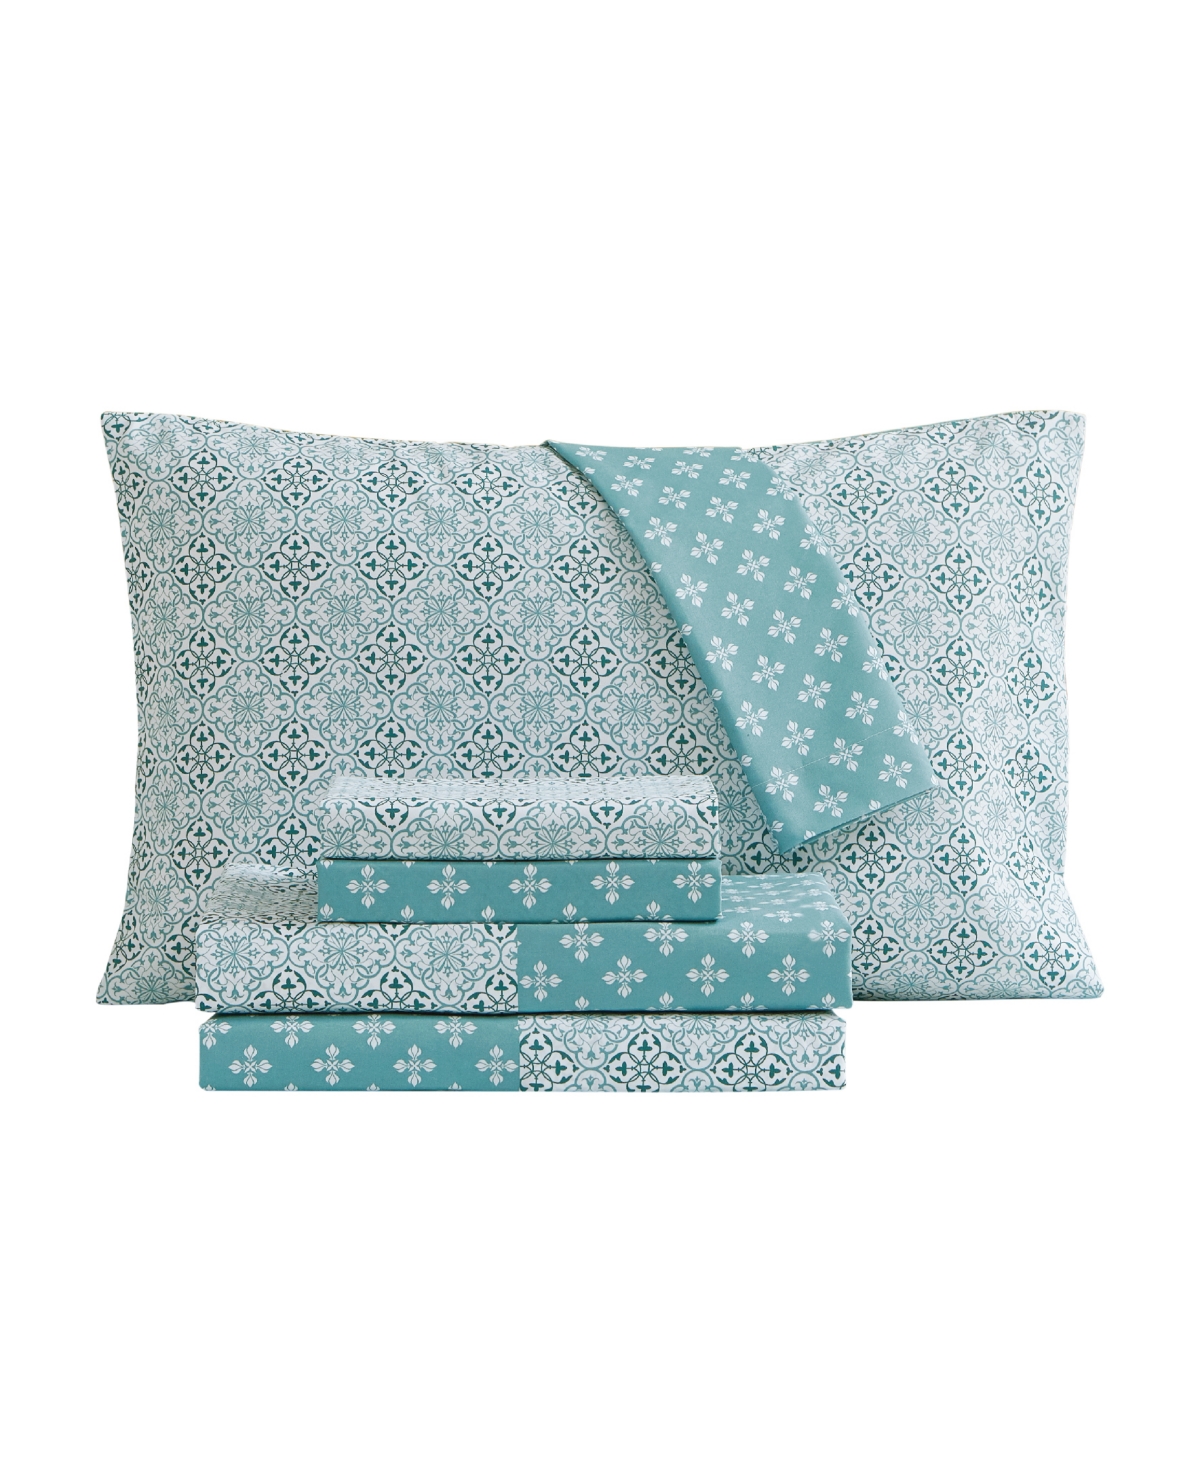 Jessica Sanders Diamond Turnstyle Reversible Printed Super Soft Deep Pocket Twin Extra Long Sheet Set, 4 Pieces Bedd In Teal